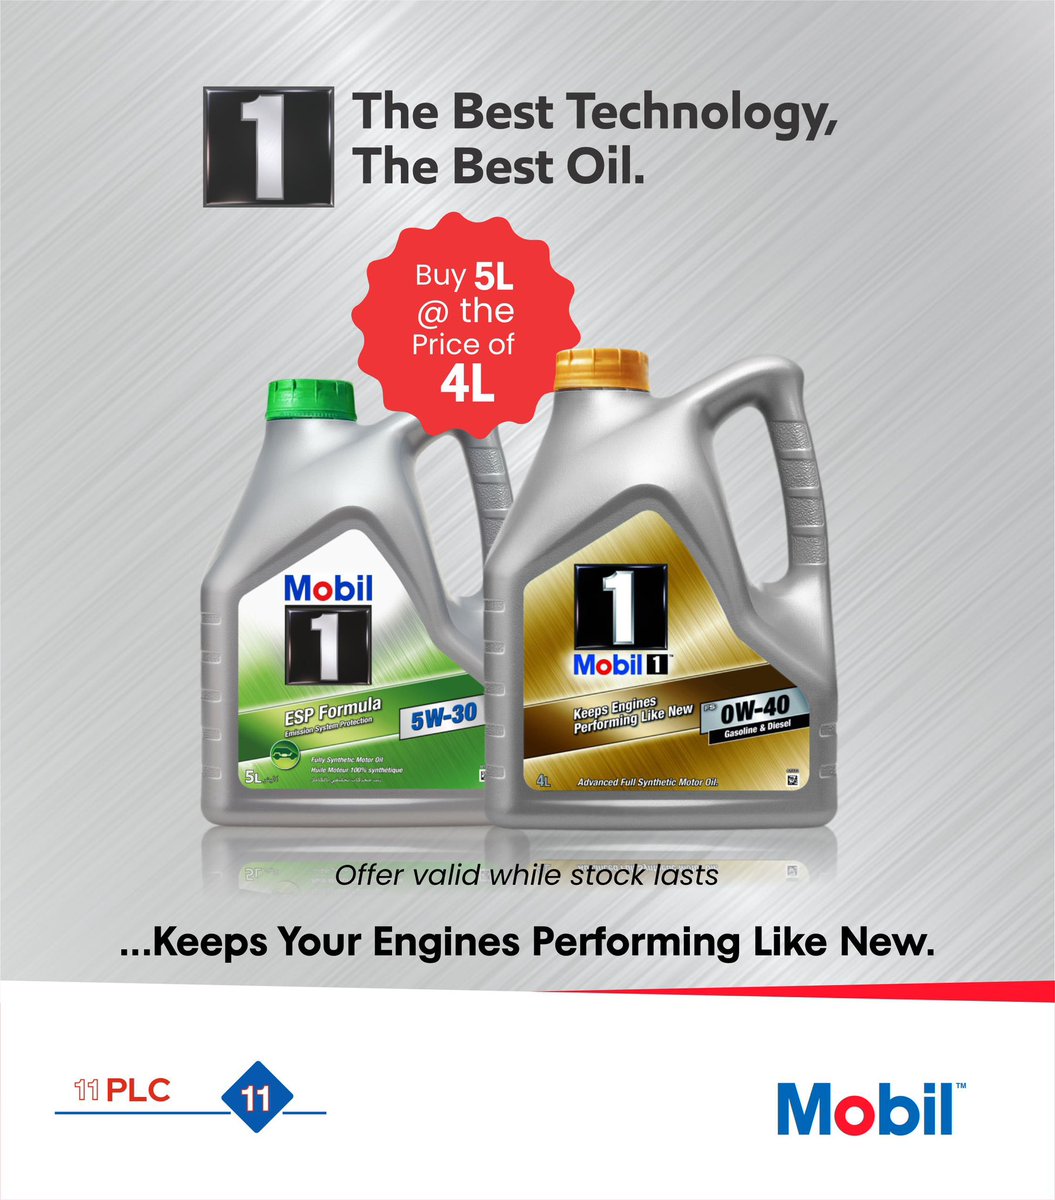 Keep your engine running smoothly with Mobil 1!
Take advantage of our special promo where you can buy a 5L bottle for the price of a 4L bottle. Don't miss out on this great deal to keep your engine in top condition.

#Mobil1 #specialpromo #mobillubricants #mobilinnigeria